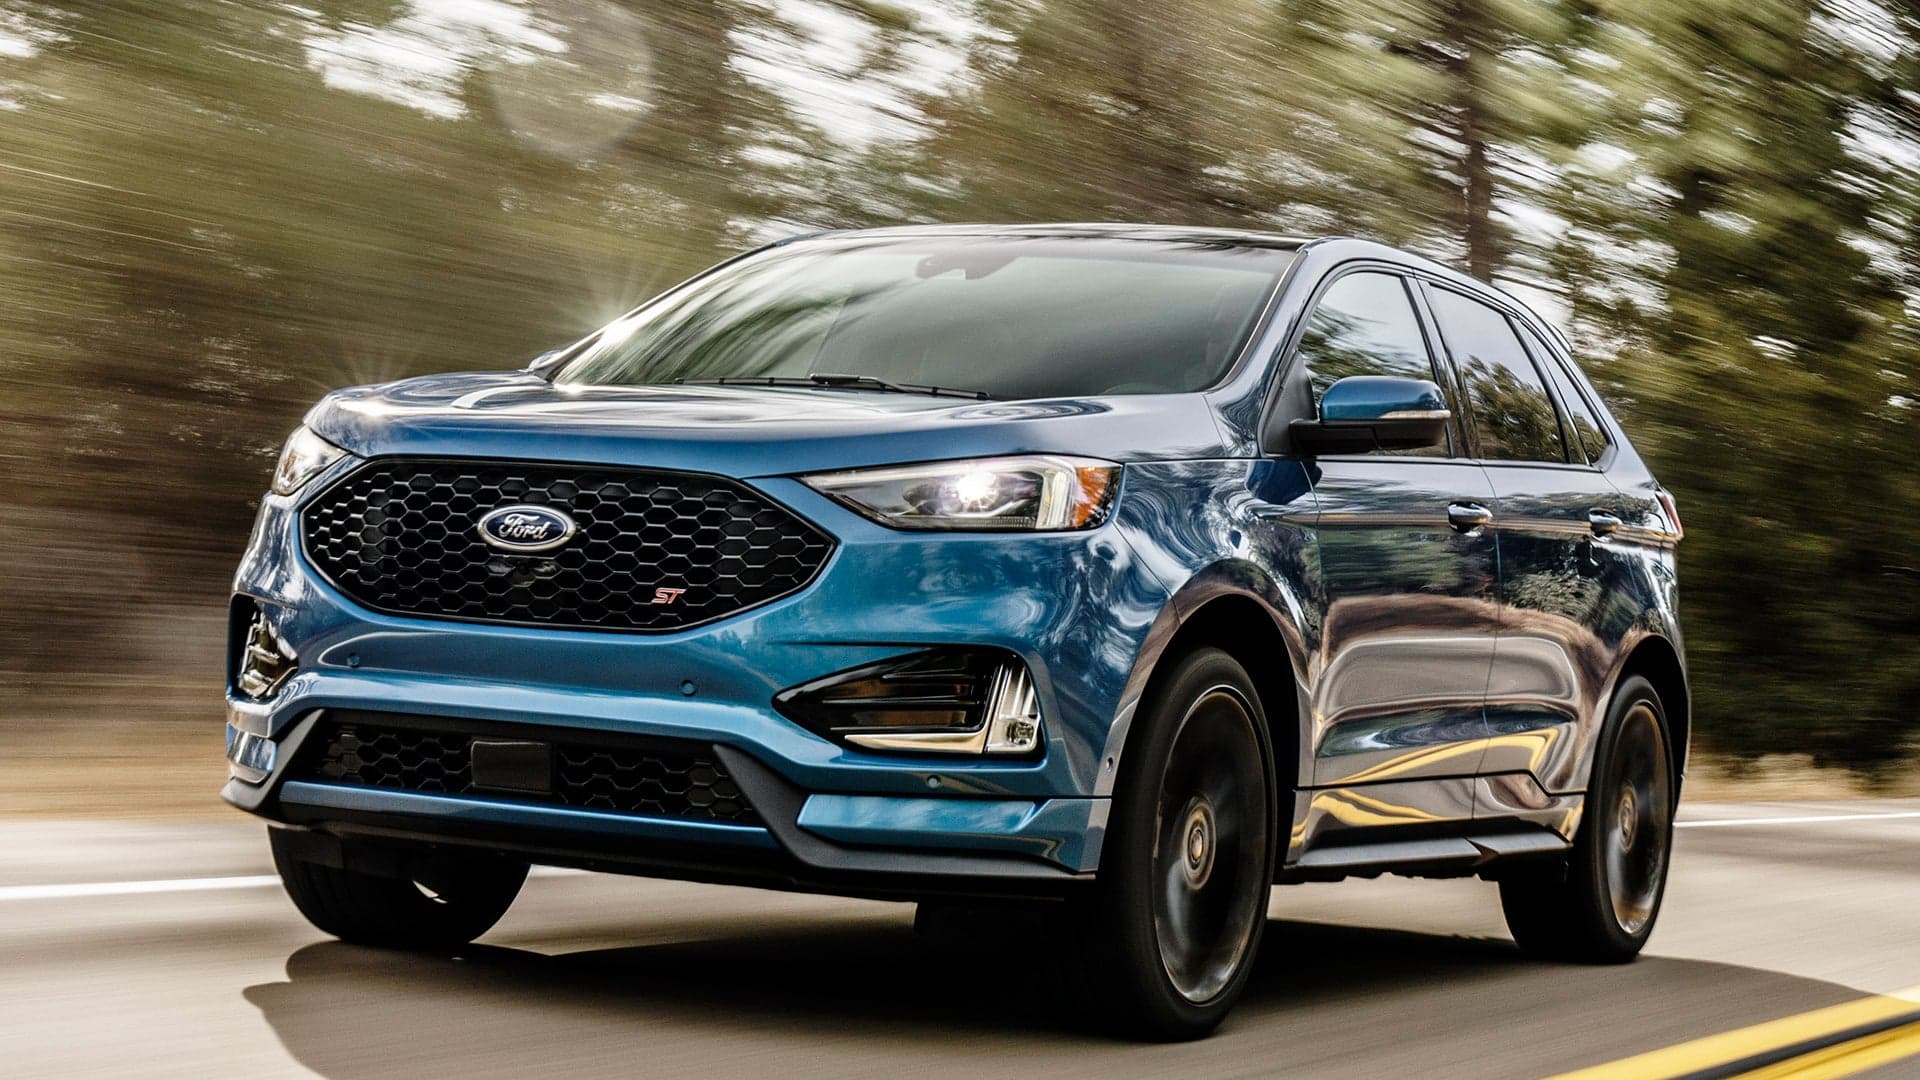 2019 Ford Edge ST Review: No High-Riding Hot Hatch, But a Satisfying, Speedy SUV Nonetheless